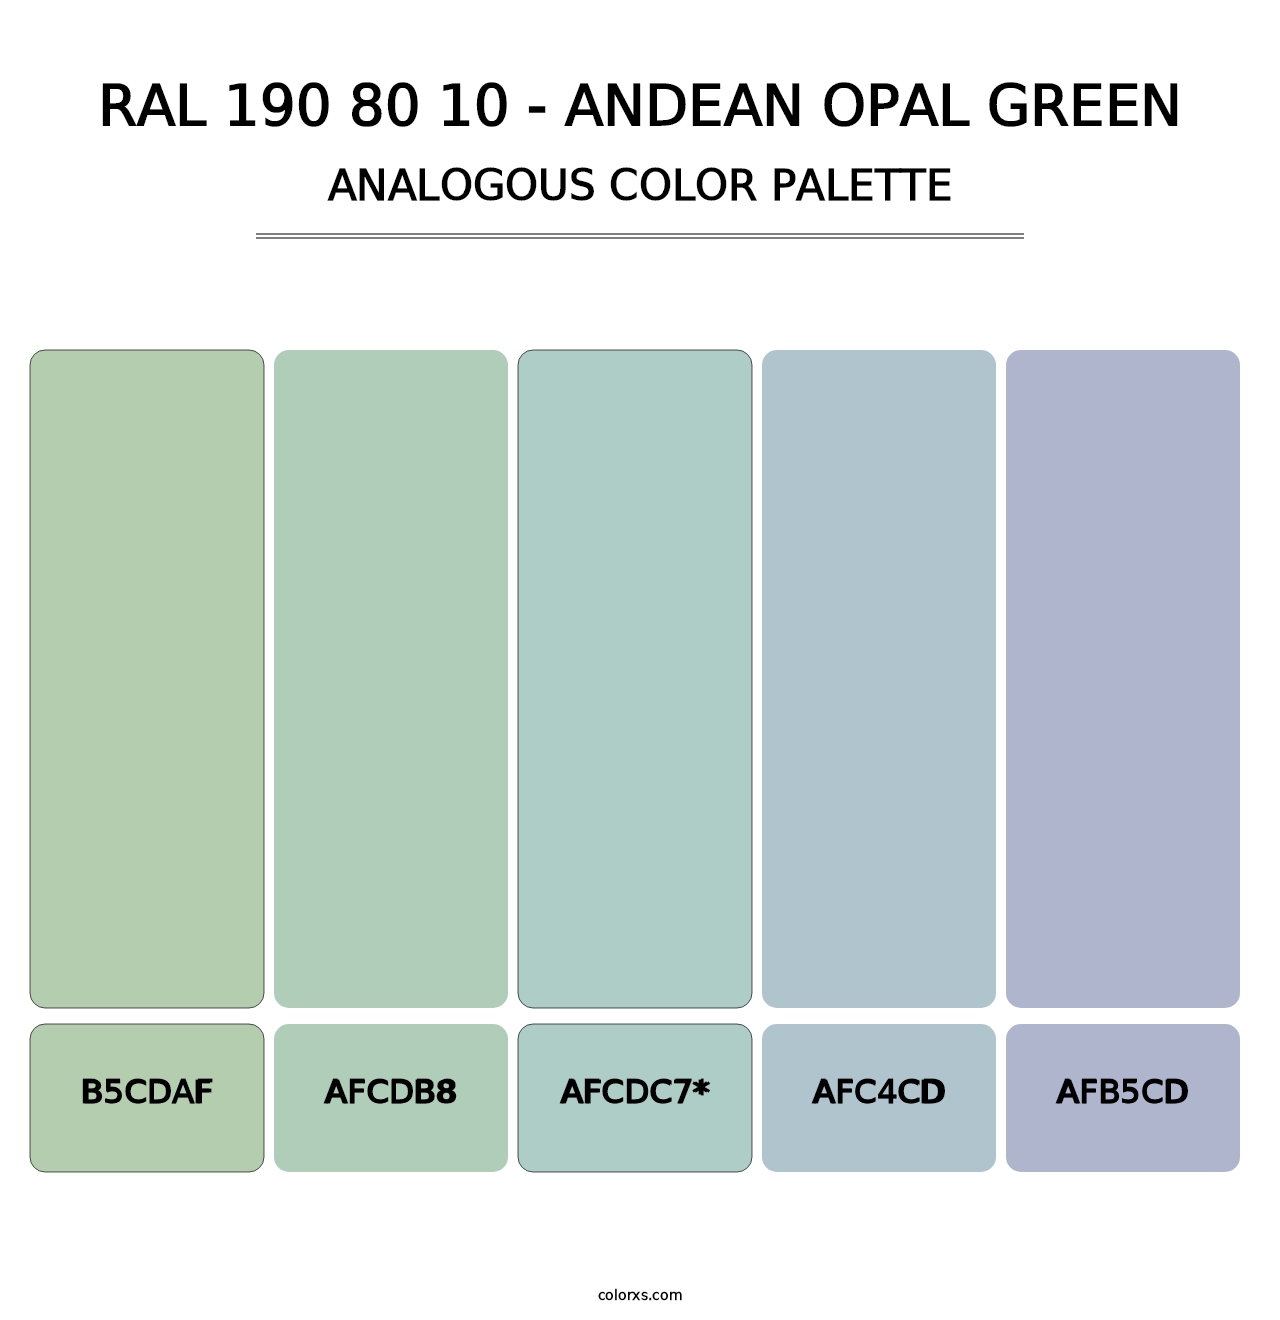 RAL 190 80 10 - Andean Opal Green - Analogous Color Palette